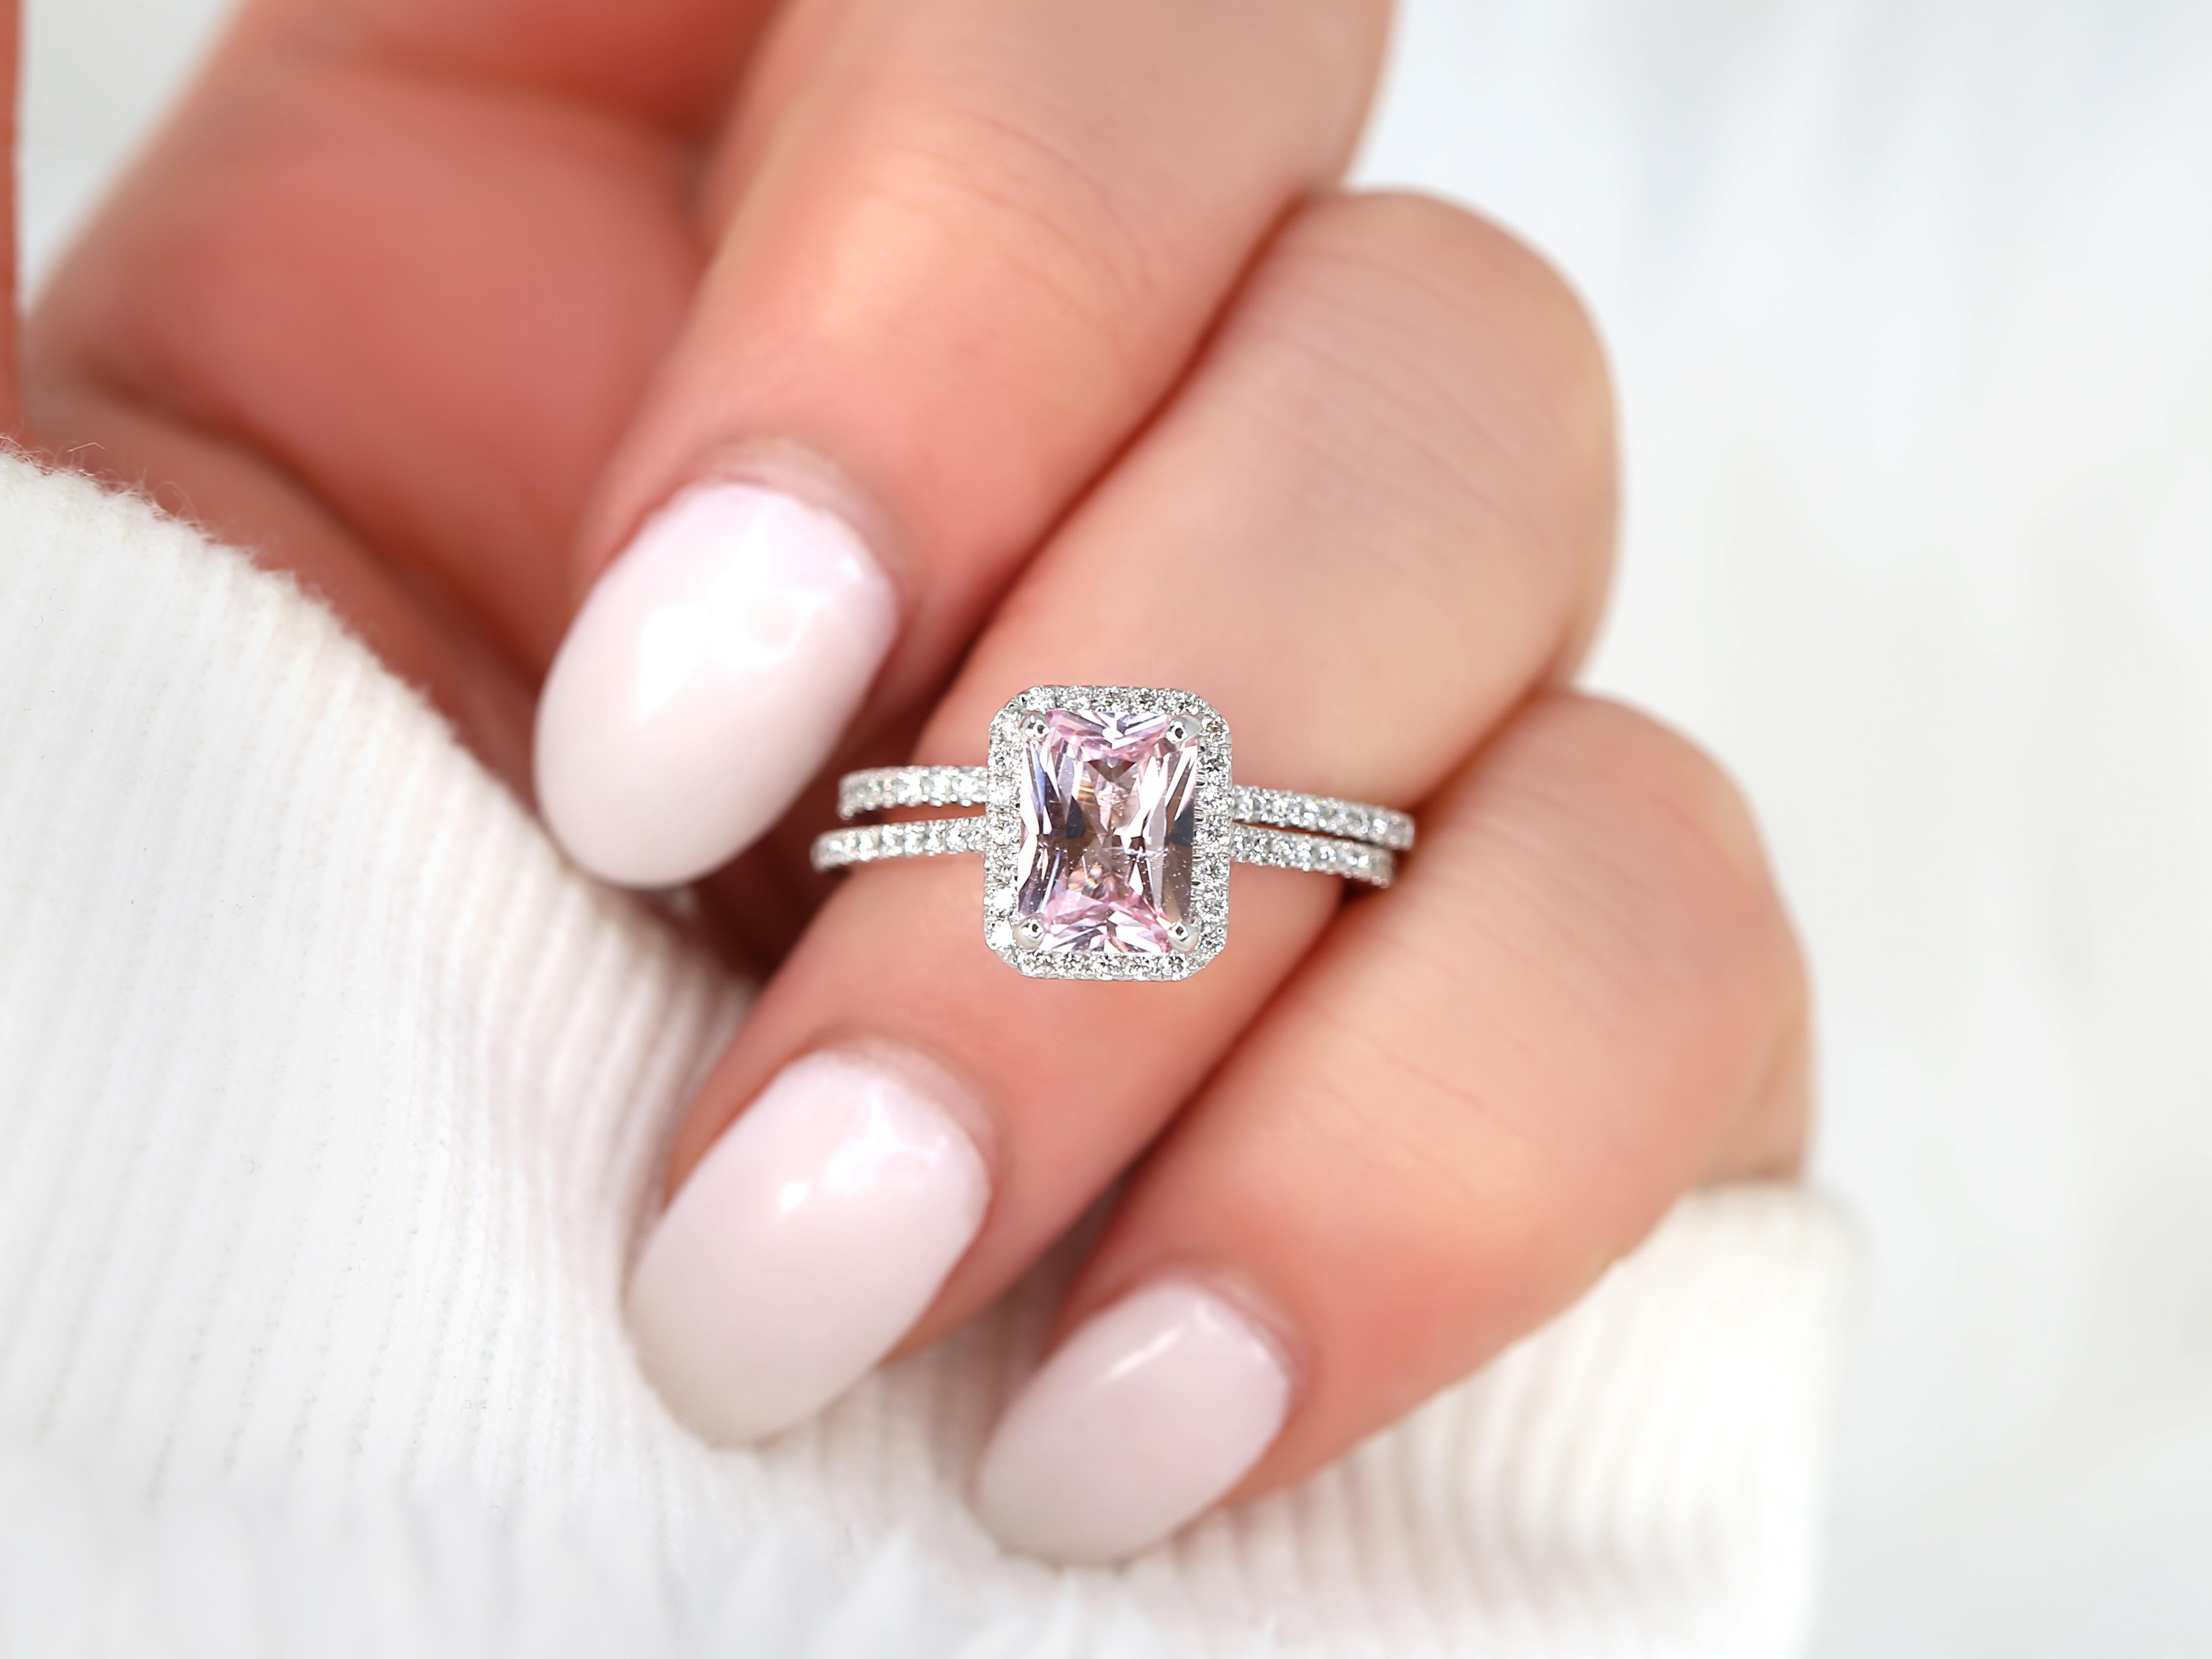 Experience the enchantment of our radiant blush sapphire halo bridal set in white gold. Featuring a dazzling blush sapphire center stone surrounded by a shimmering halo of diamonds, this set embodies elegance and grace. Crafted in white gold, it